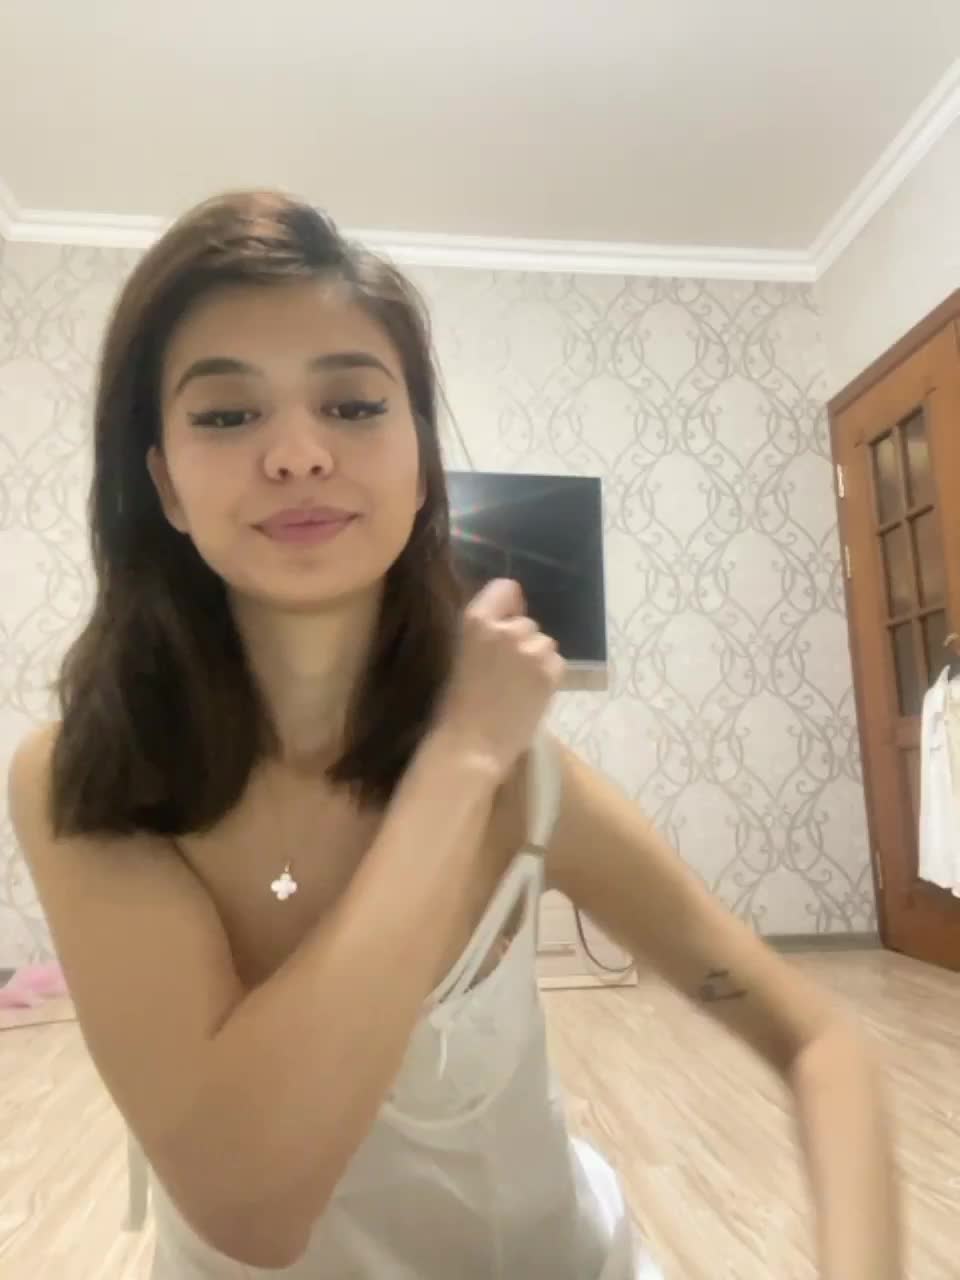 View or download file djulianaa on 2023-03-23 from bongacams